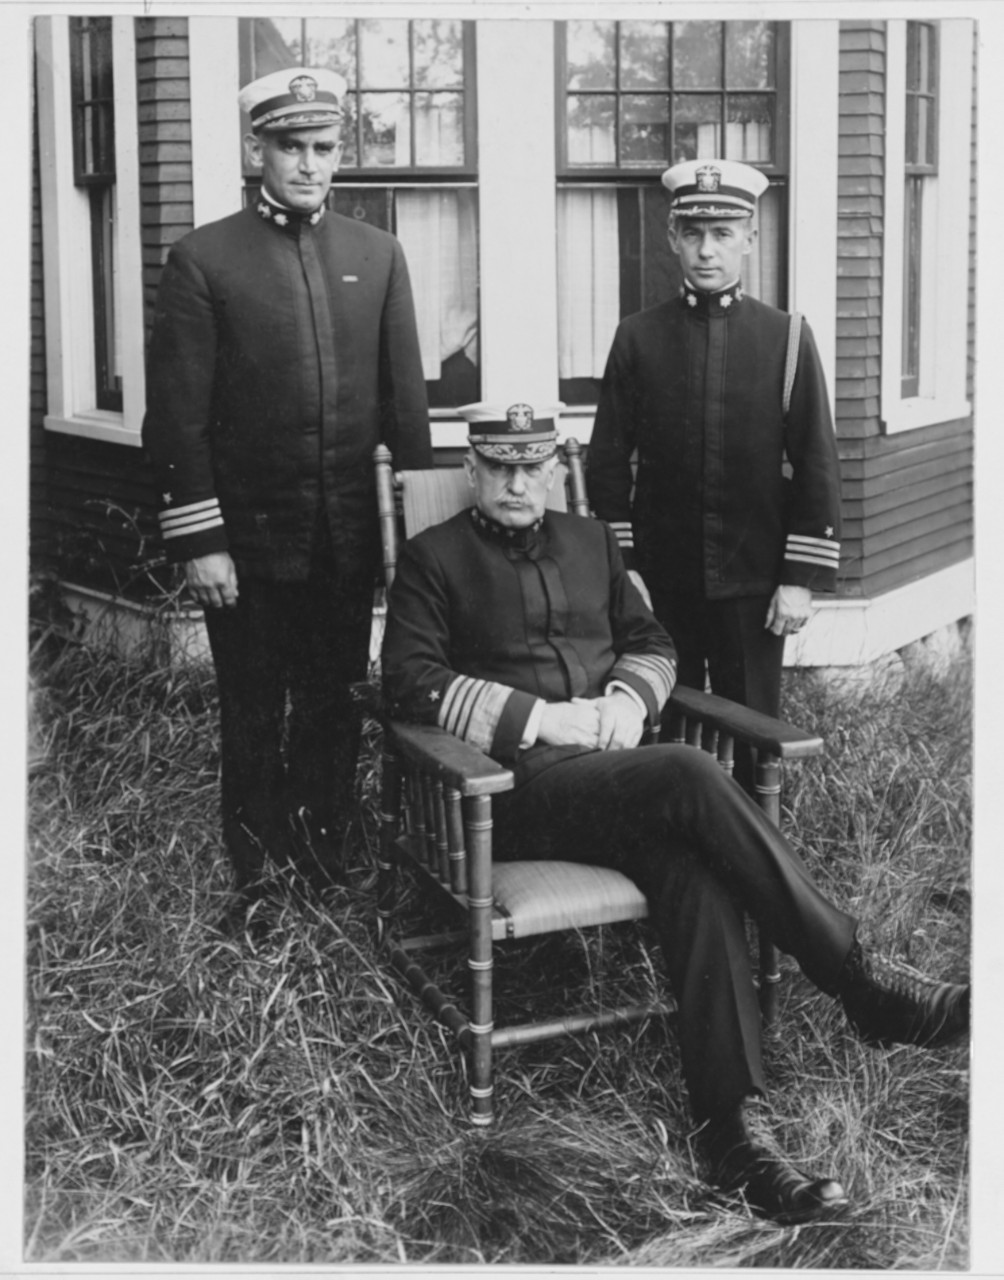 Photogrpah of Benson with his aide and another naval officer